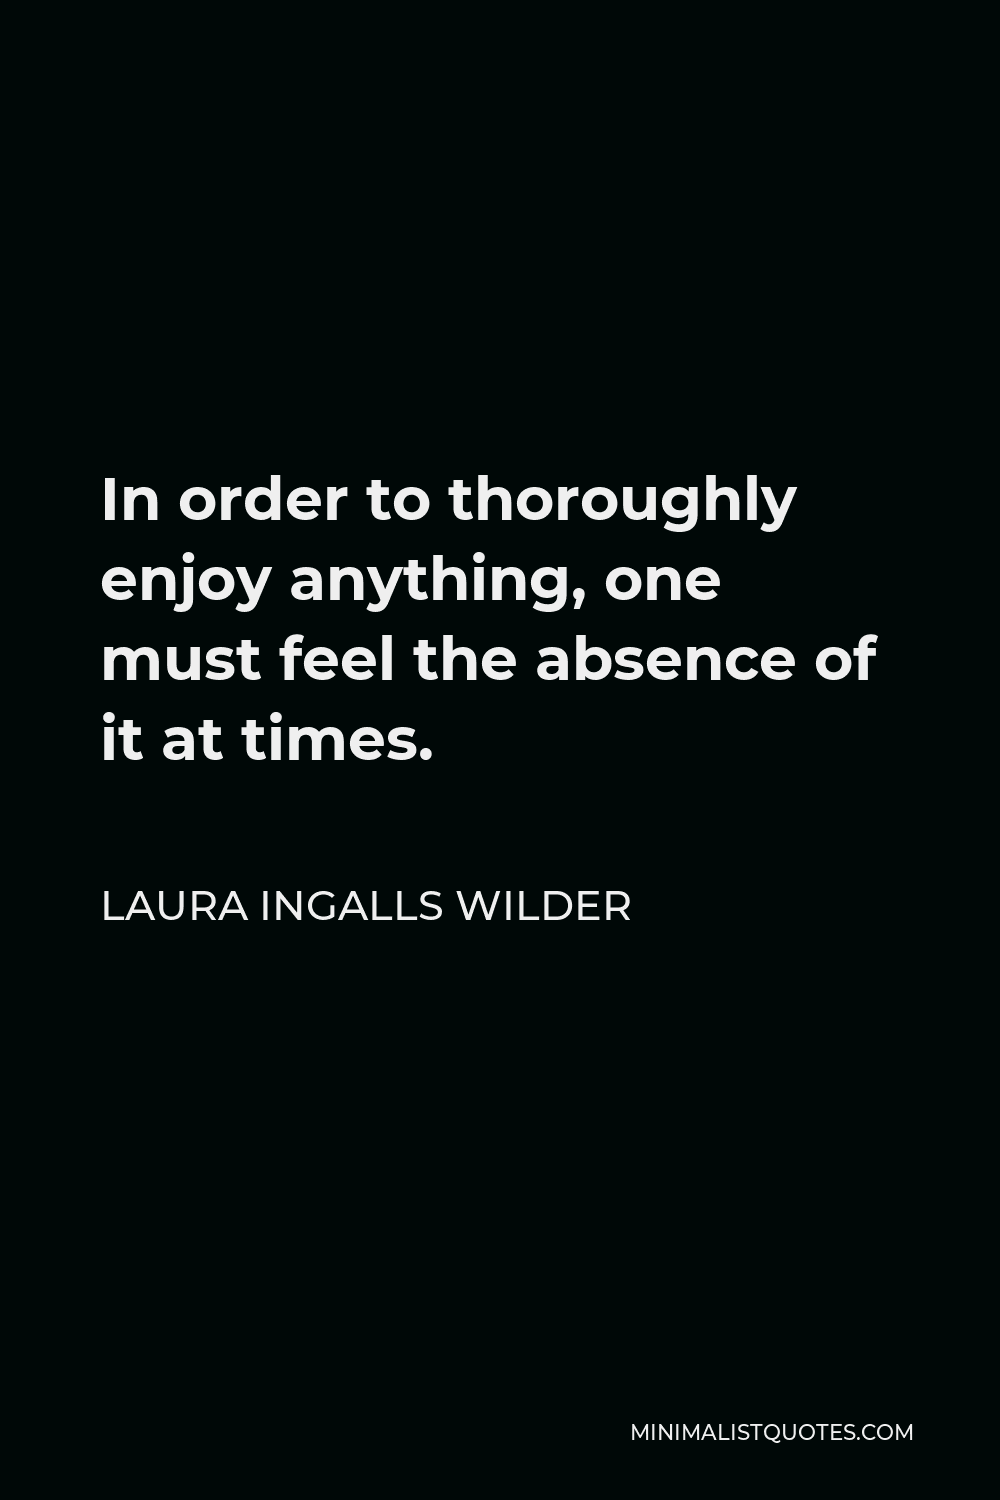 Laura Ingalls Wilder Quote - In order to thoroughly enjoy anything, one must feel the absence of it at times.